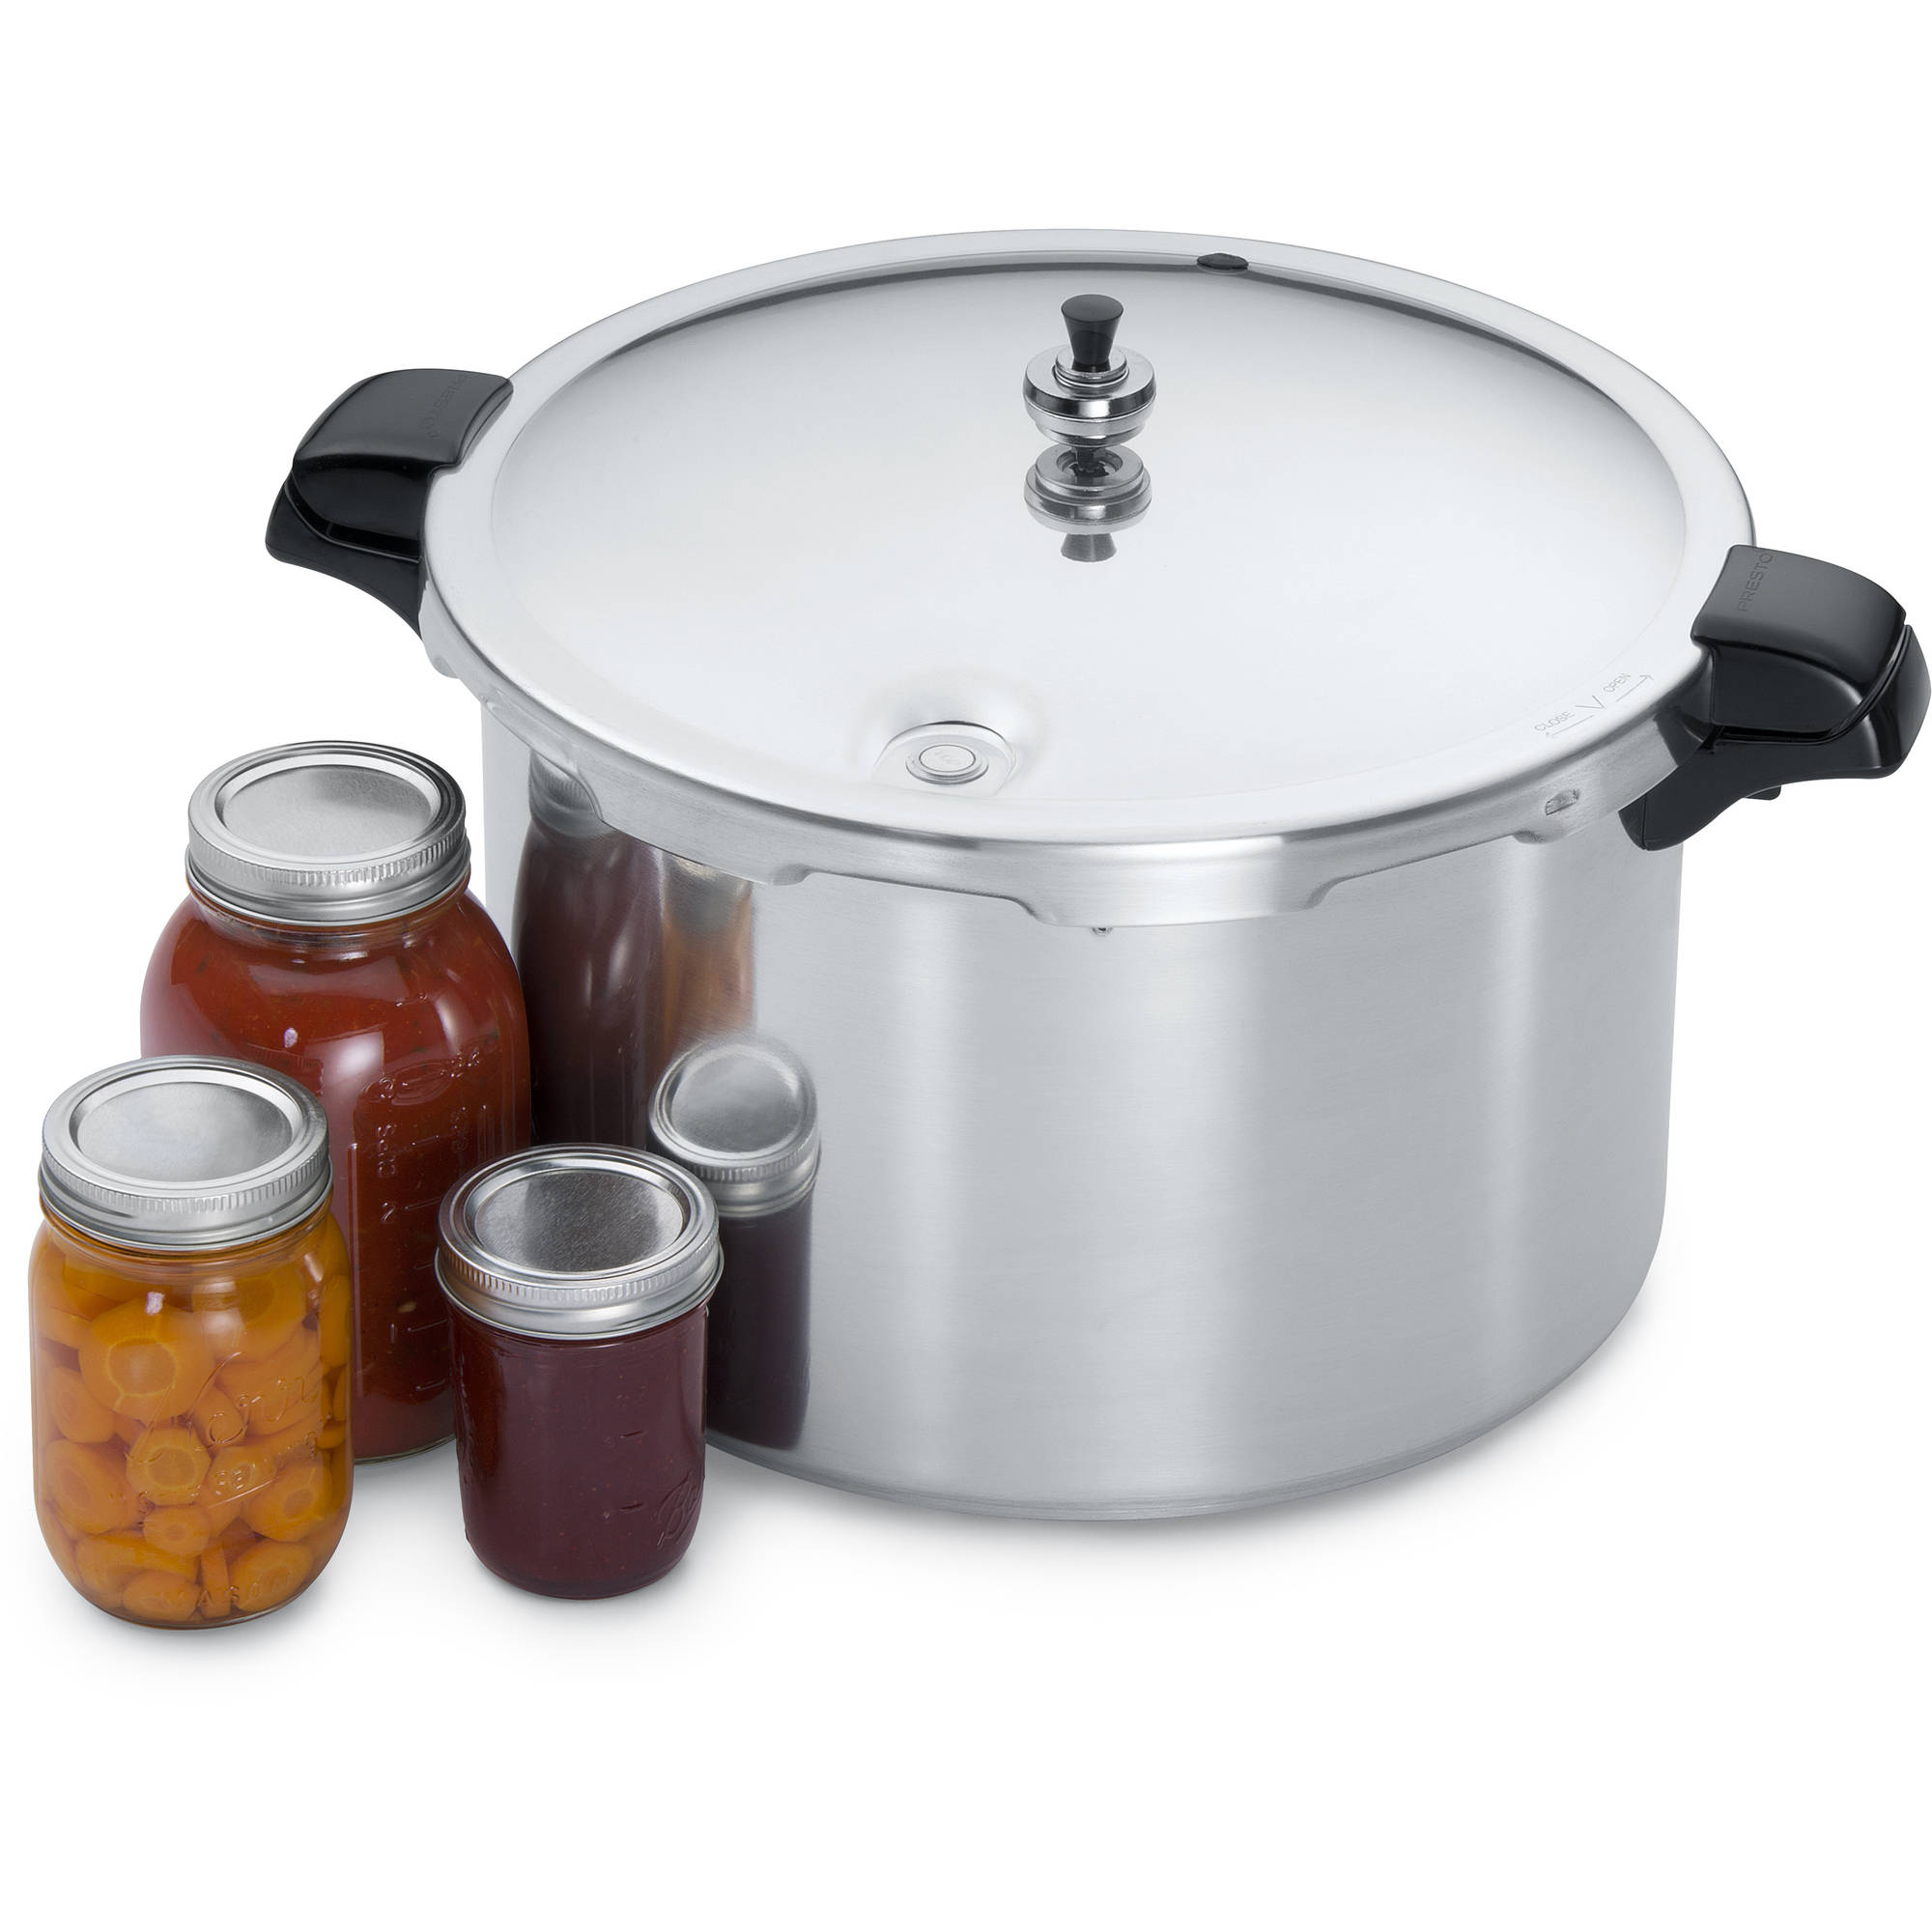 Presto® 16-Quart Pressure Canner and Cooker 01745 - image 1 of 11